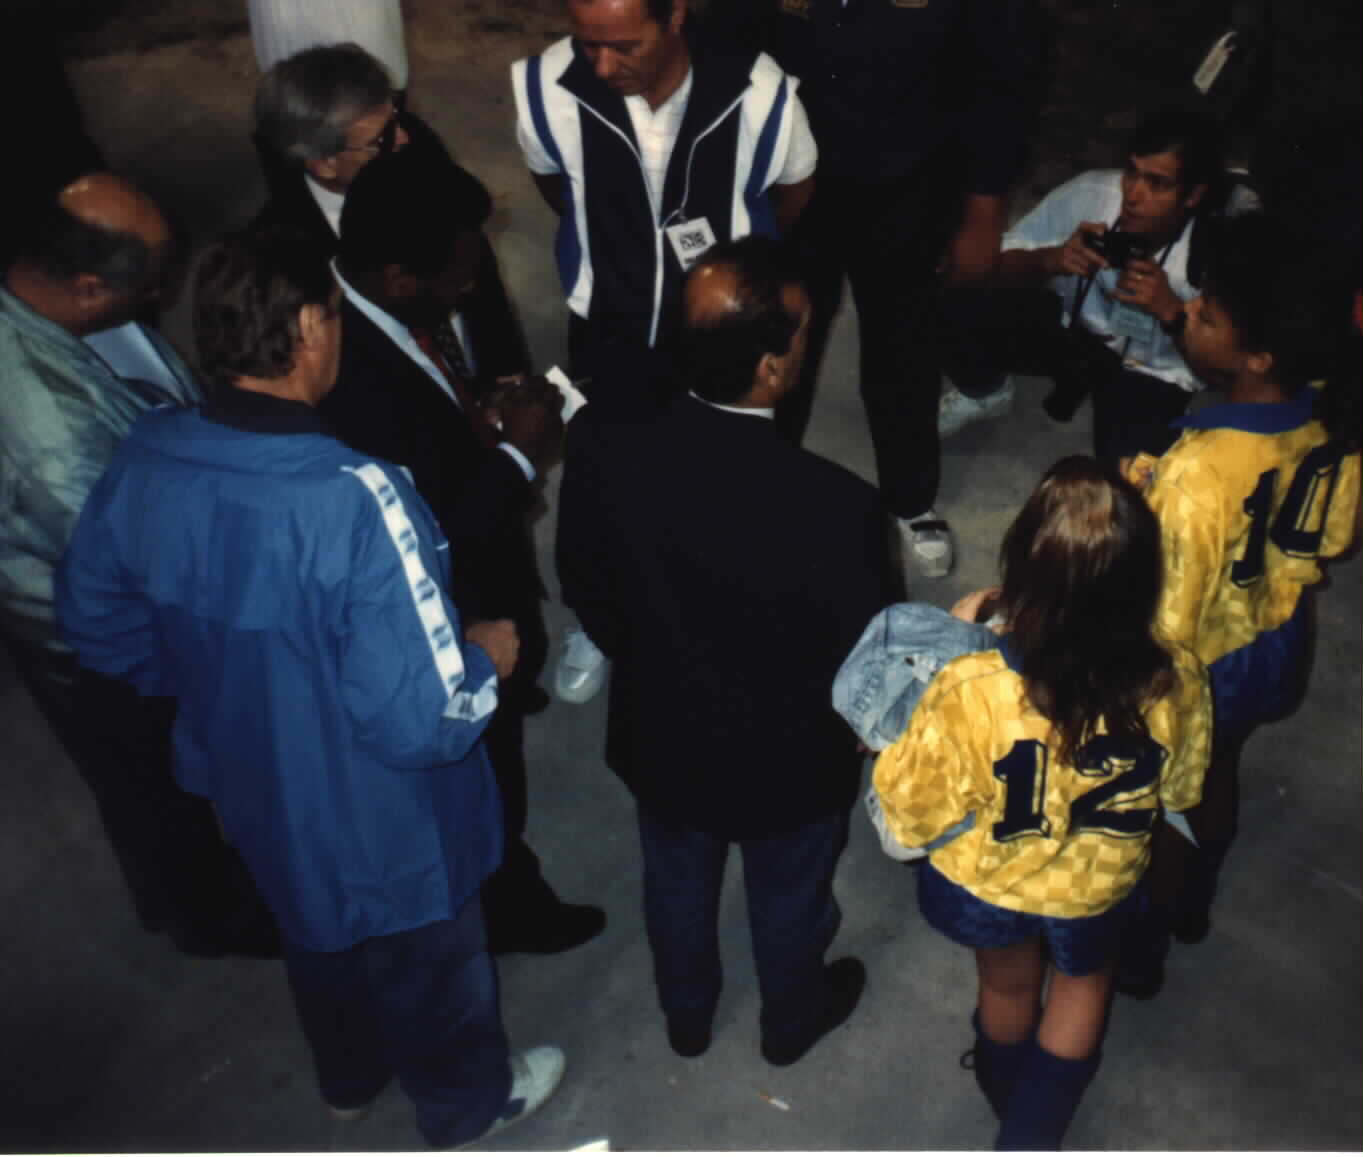 (Picture photographed by Noe Dorestant: Pele' signing autograph for fans during Copa Pele 91 in Miami.) Courtesy
Noe Dorestant. If you copy for reuse, give credit where credit is due. 